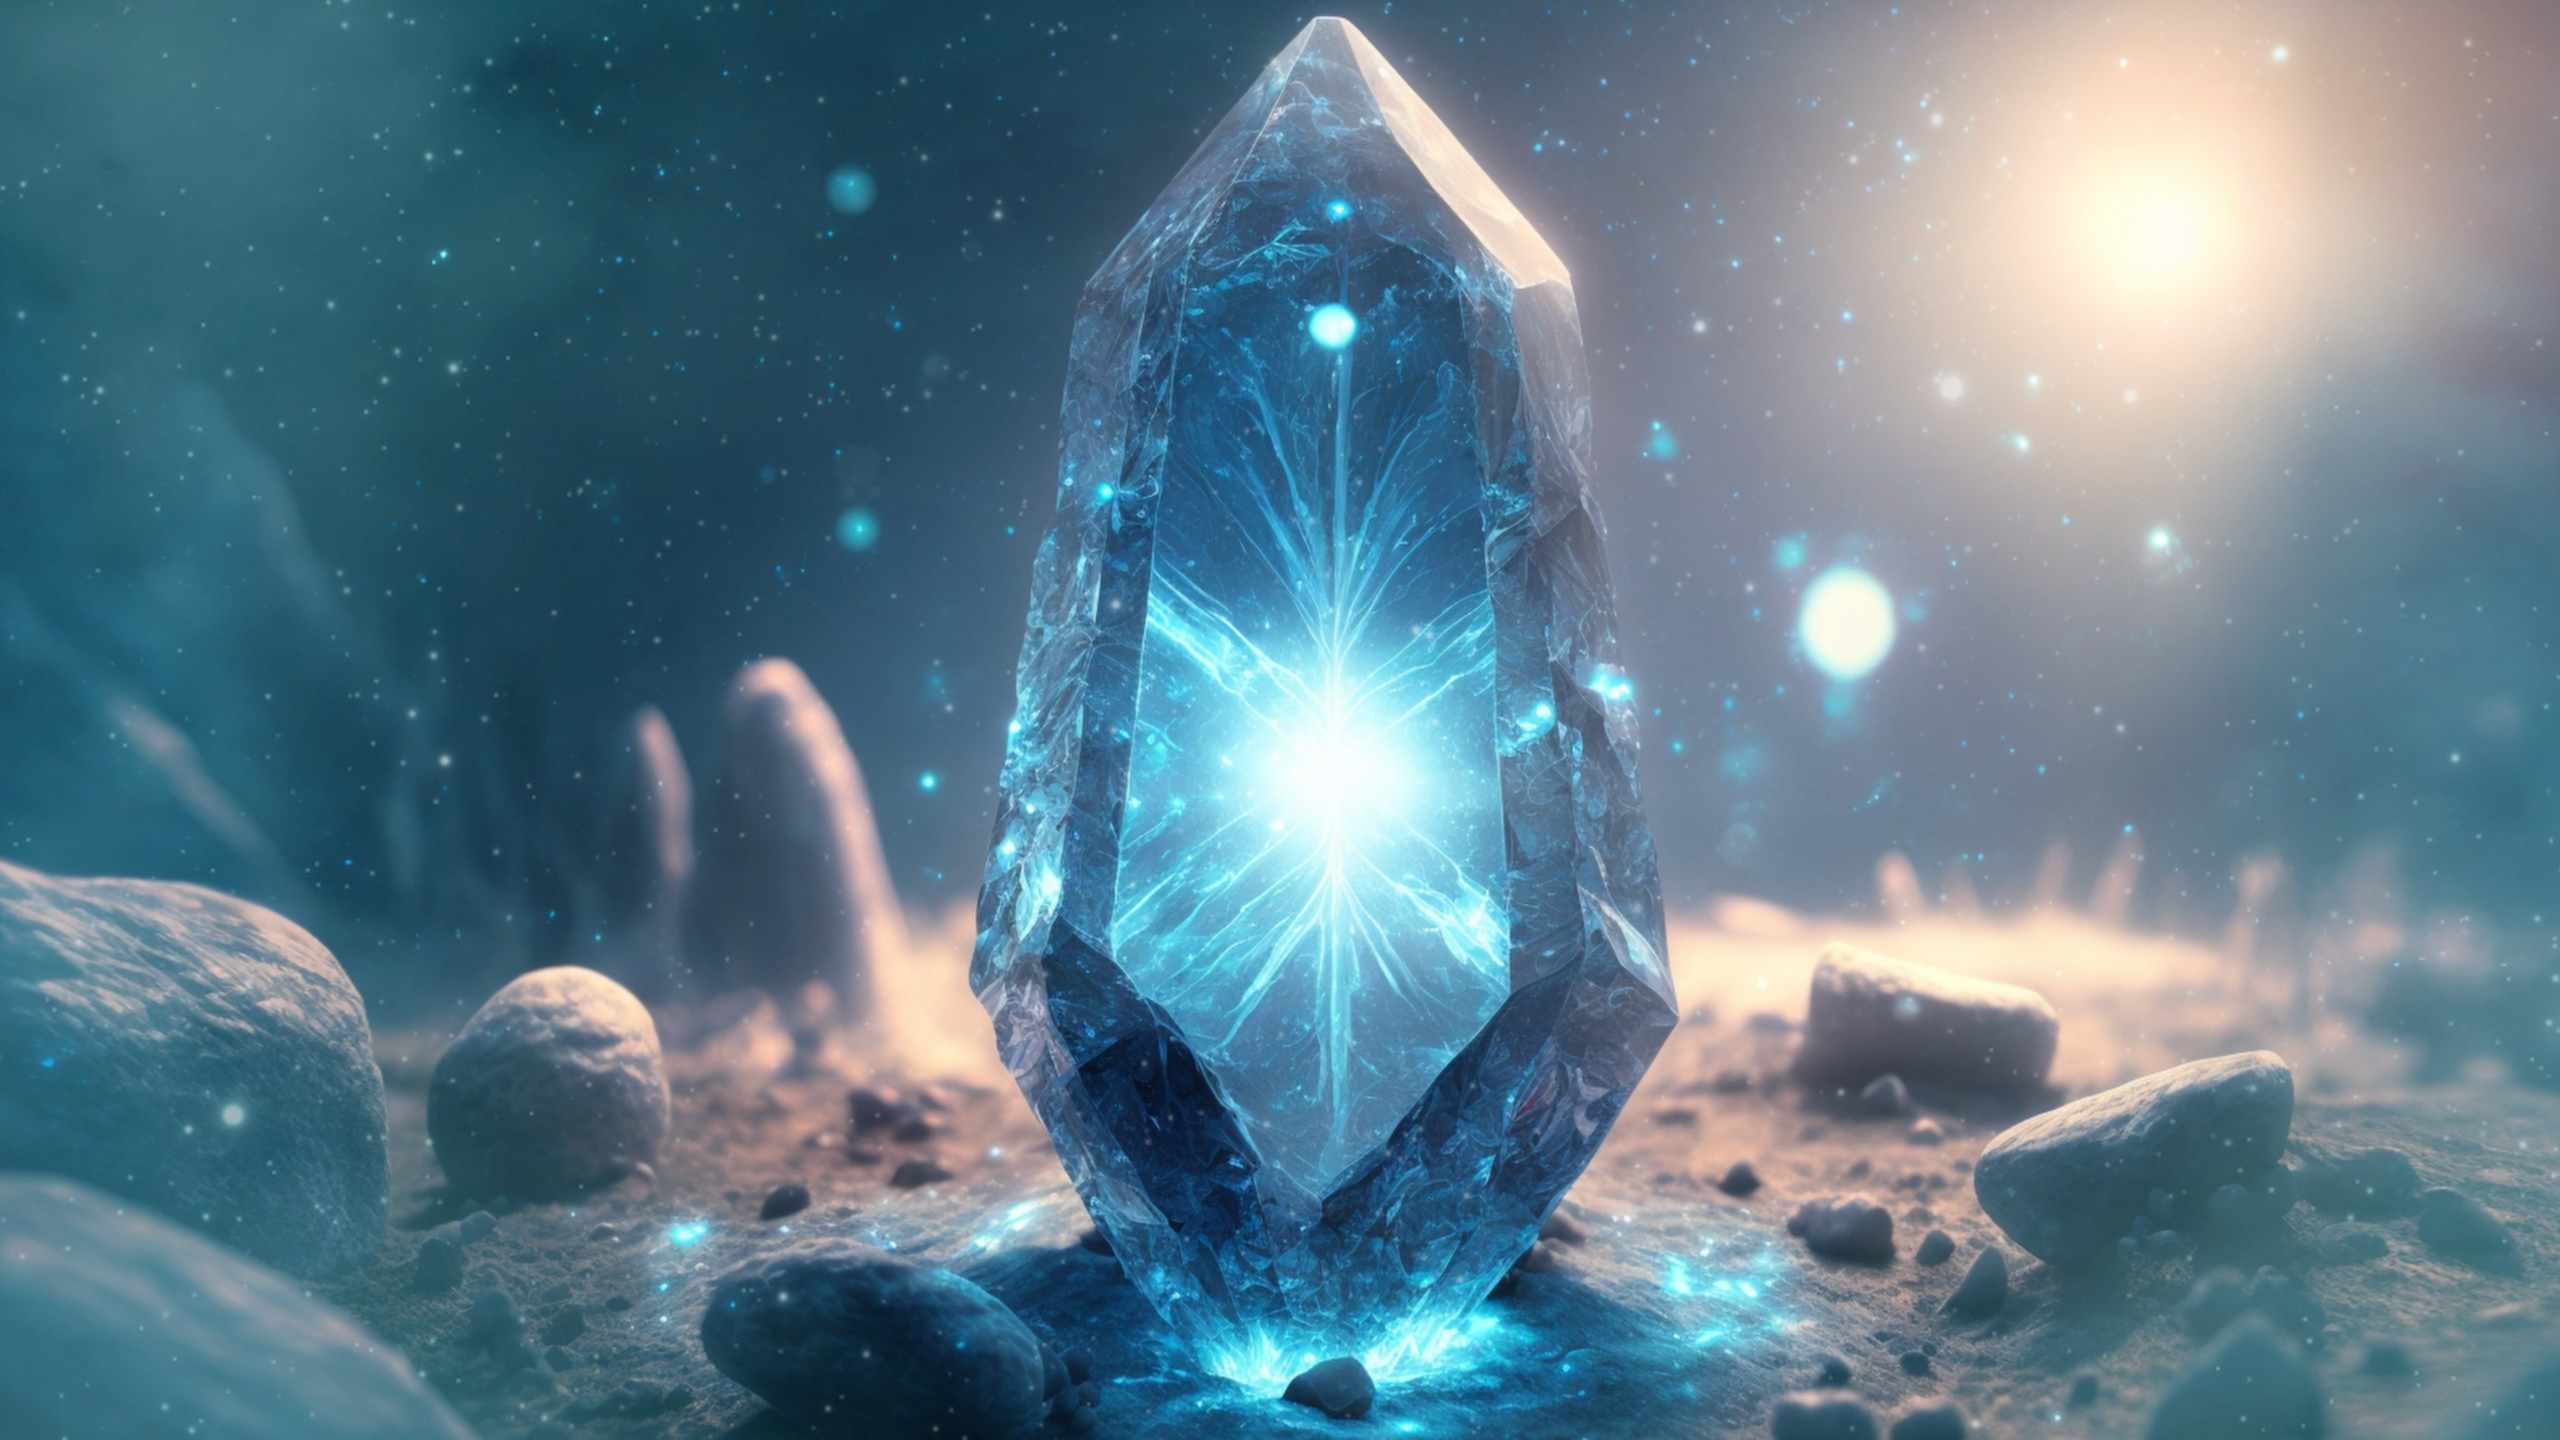 Gaia And The Crystal Of Light - Guided Meditation